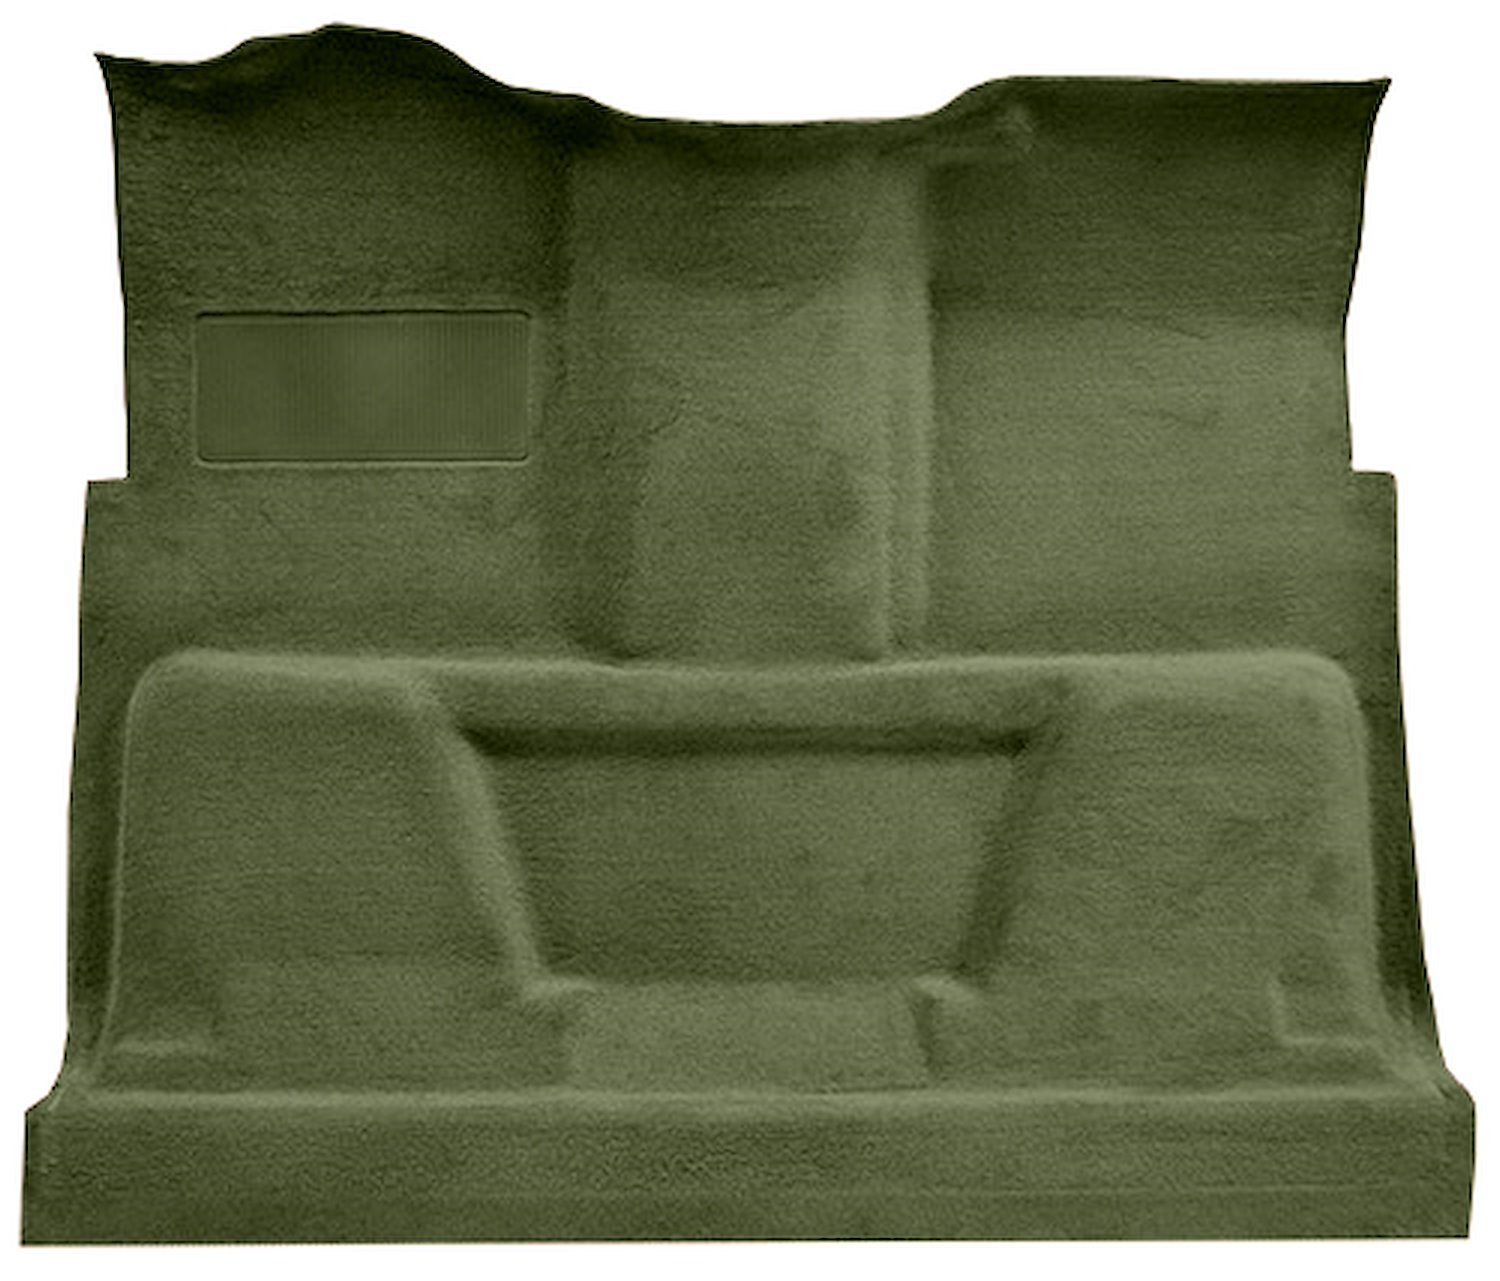 Molded Loop Carpet for 1973 GM C Series Regular Cab Trucks w/TH350 or 3-Speed Manual [Mass Backing, Dark Olive Green]